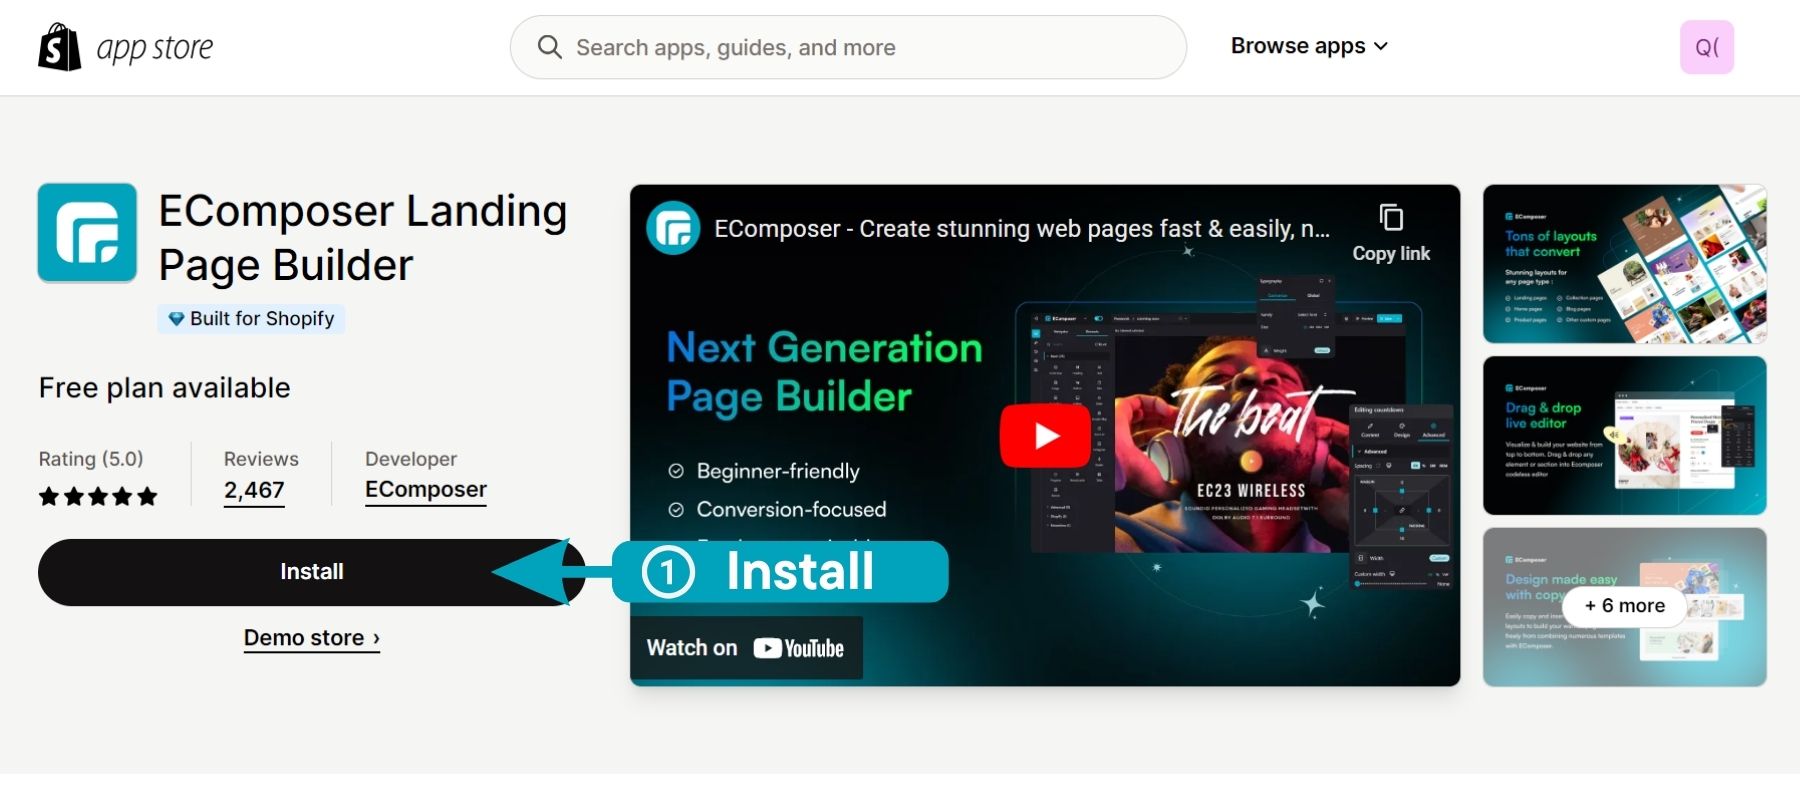 Install EComposer Page Builder